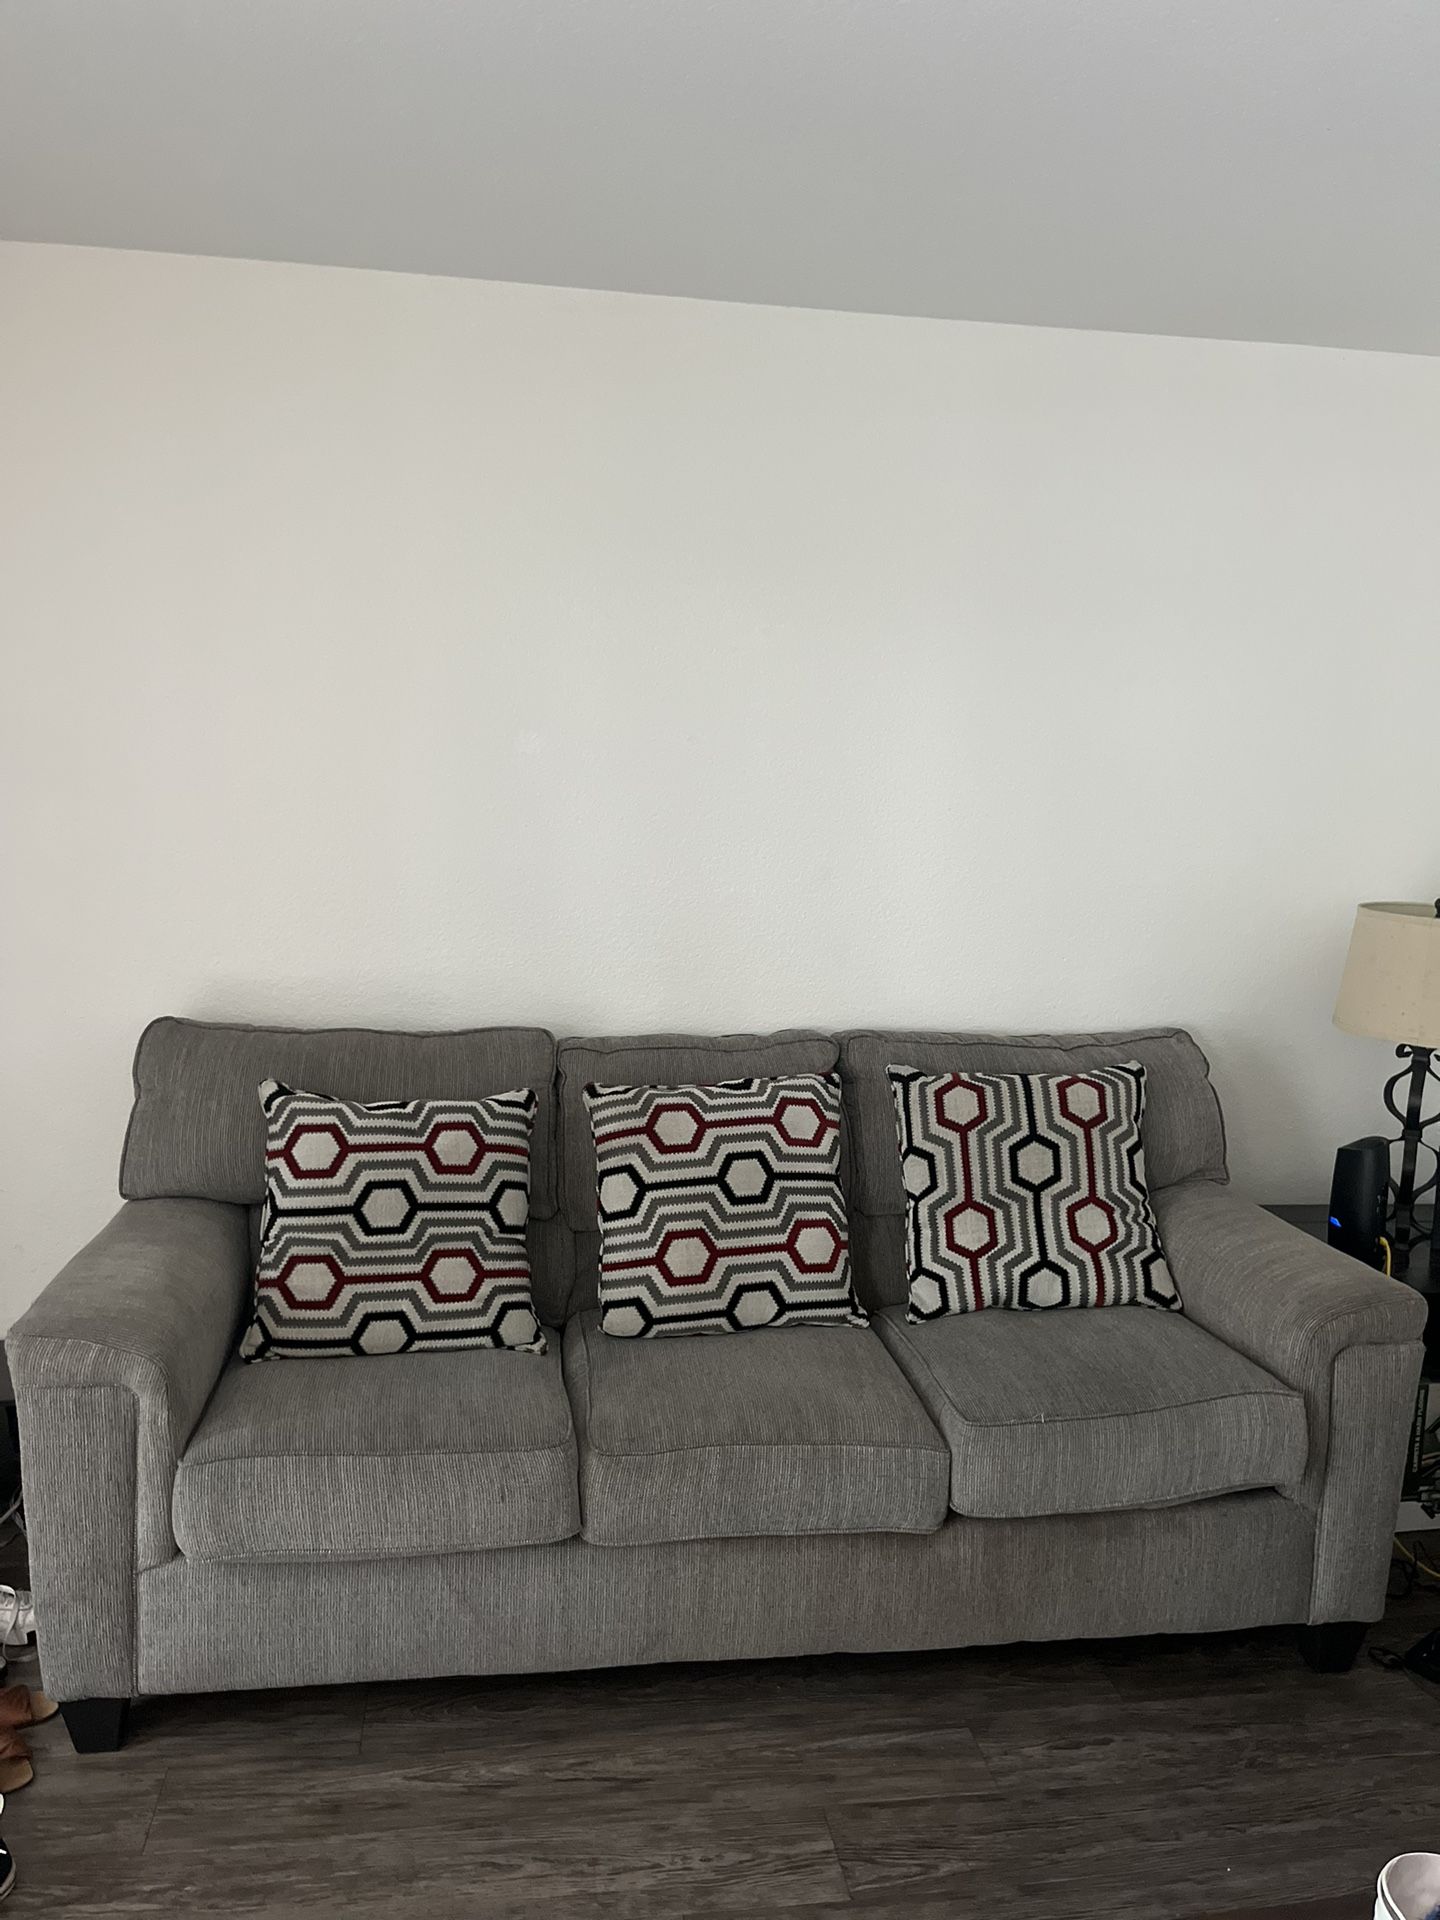 Two Gray Couches / Sofas with 4 Pillows 